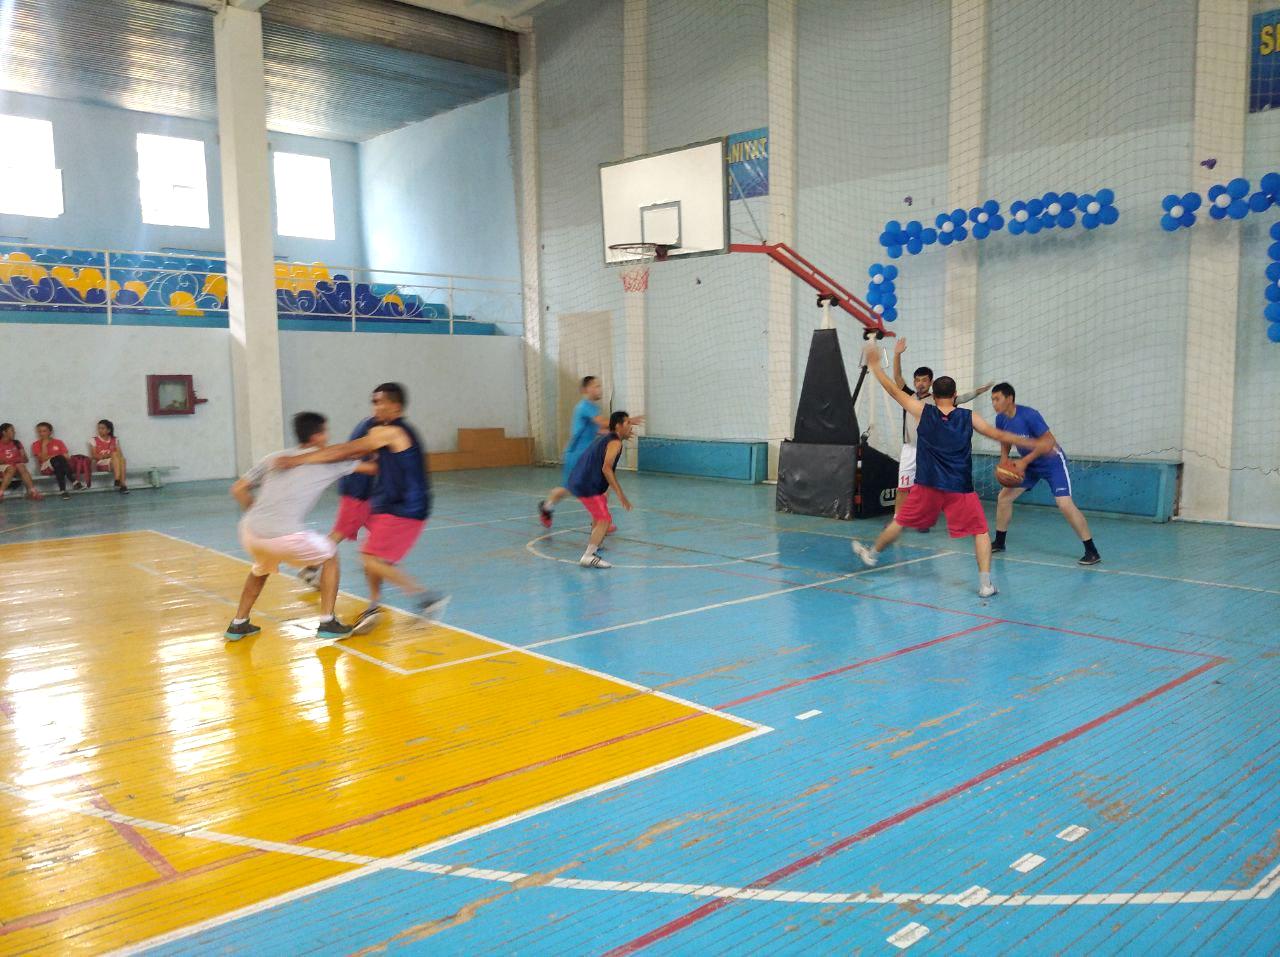 REGIONAL BASKETBALL COMPETITION WAS HELD